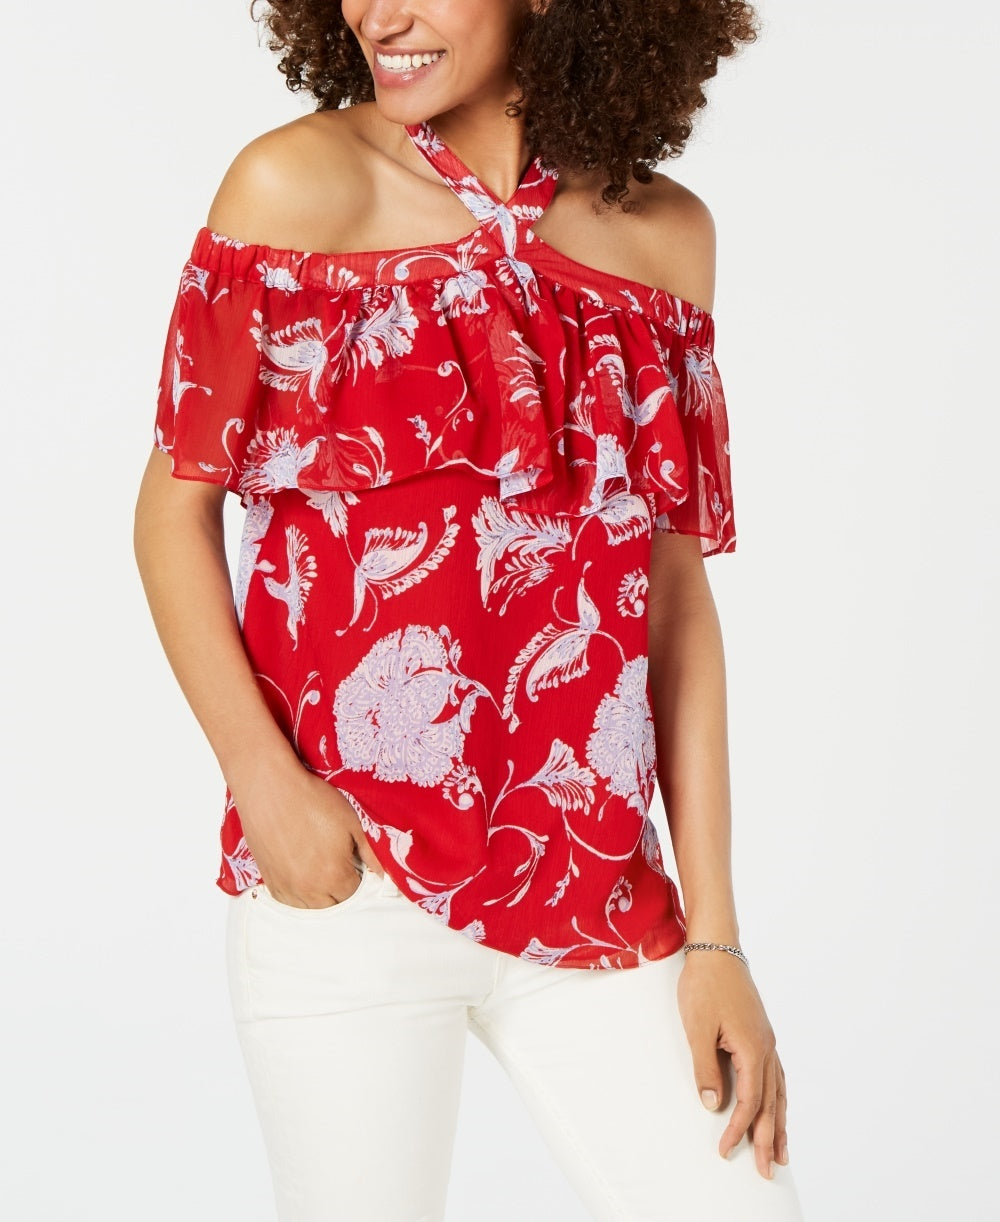 Tommy Hilfiger Women's Printed Flounce Top Red Size X-Small